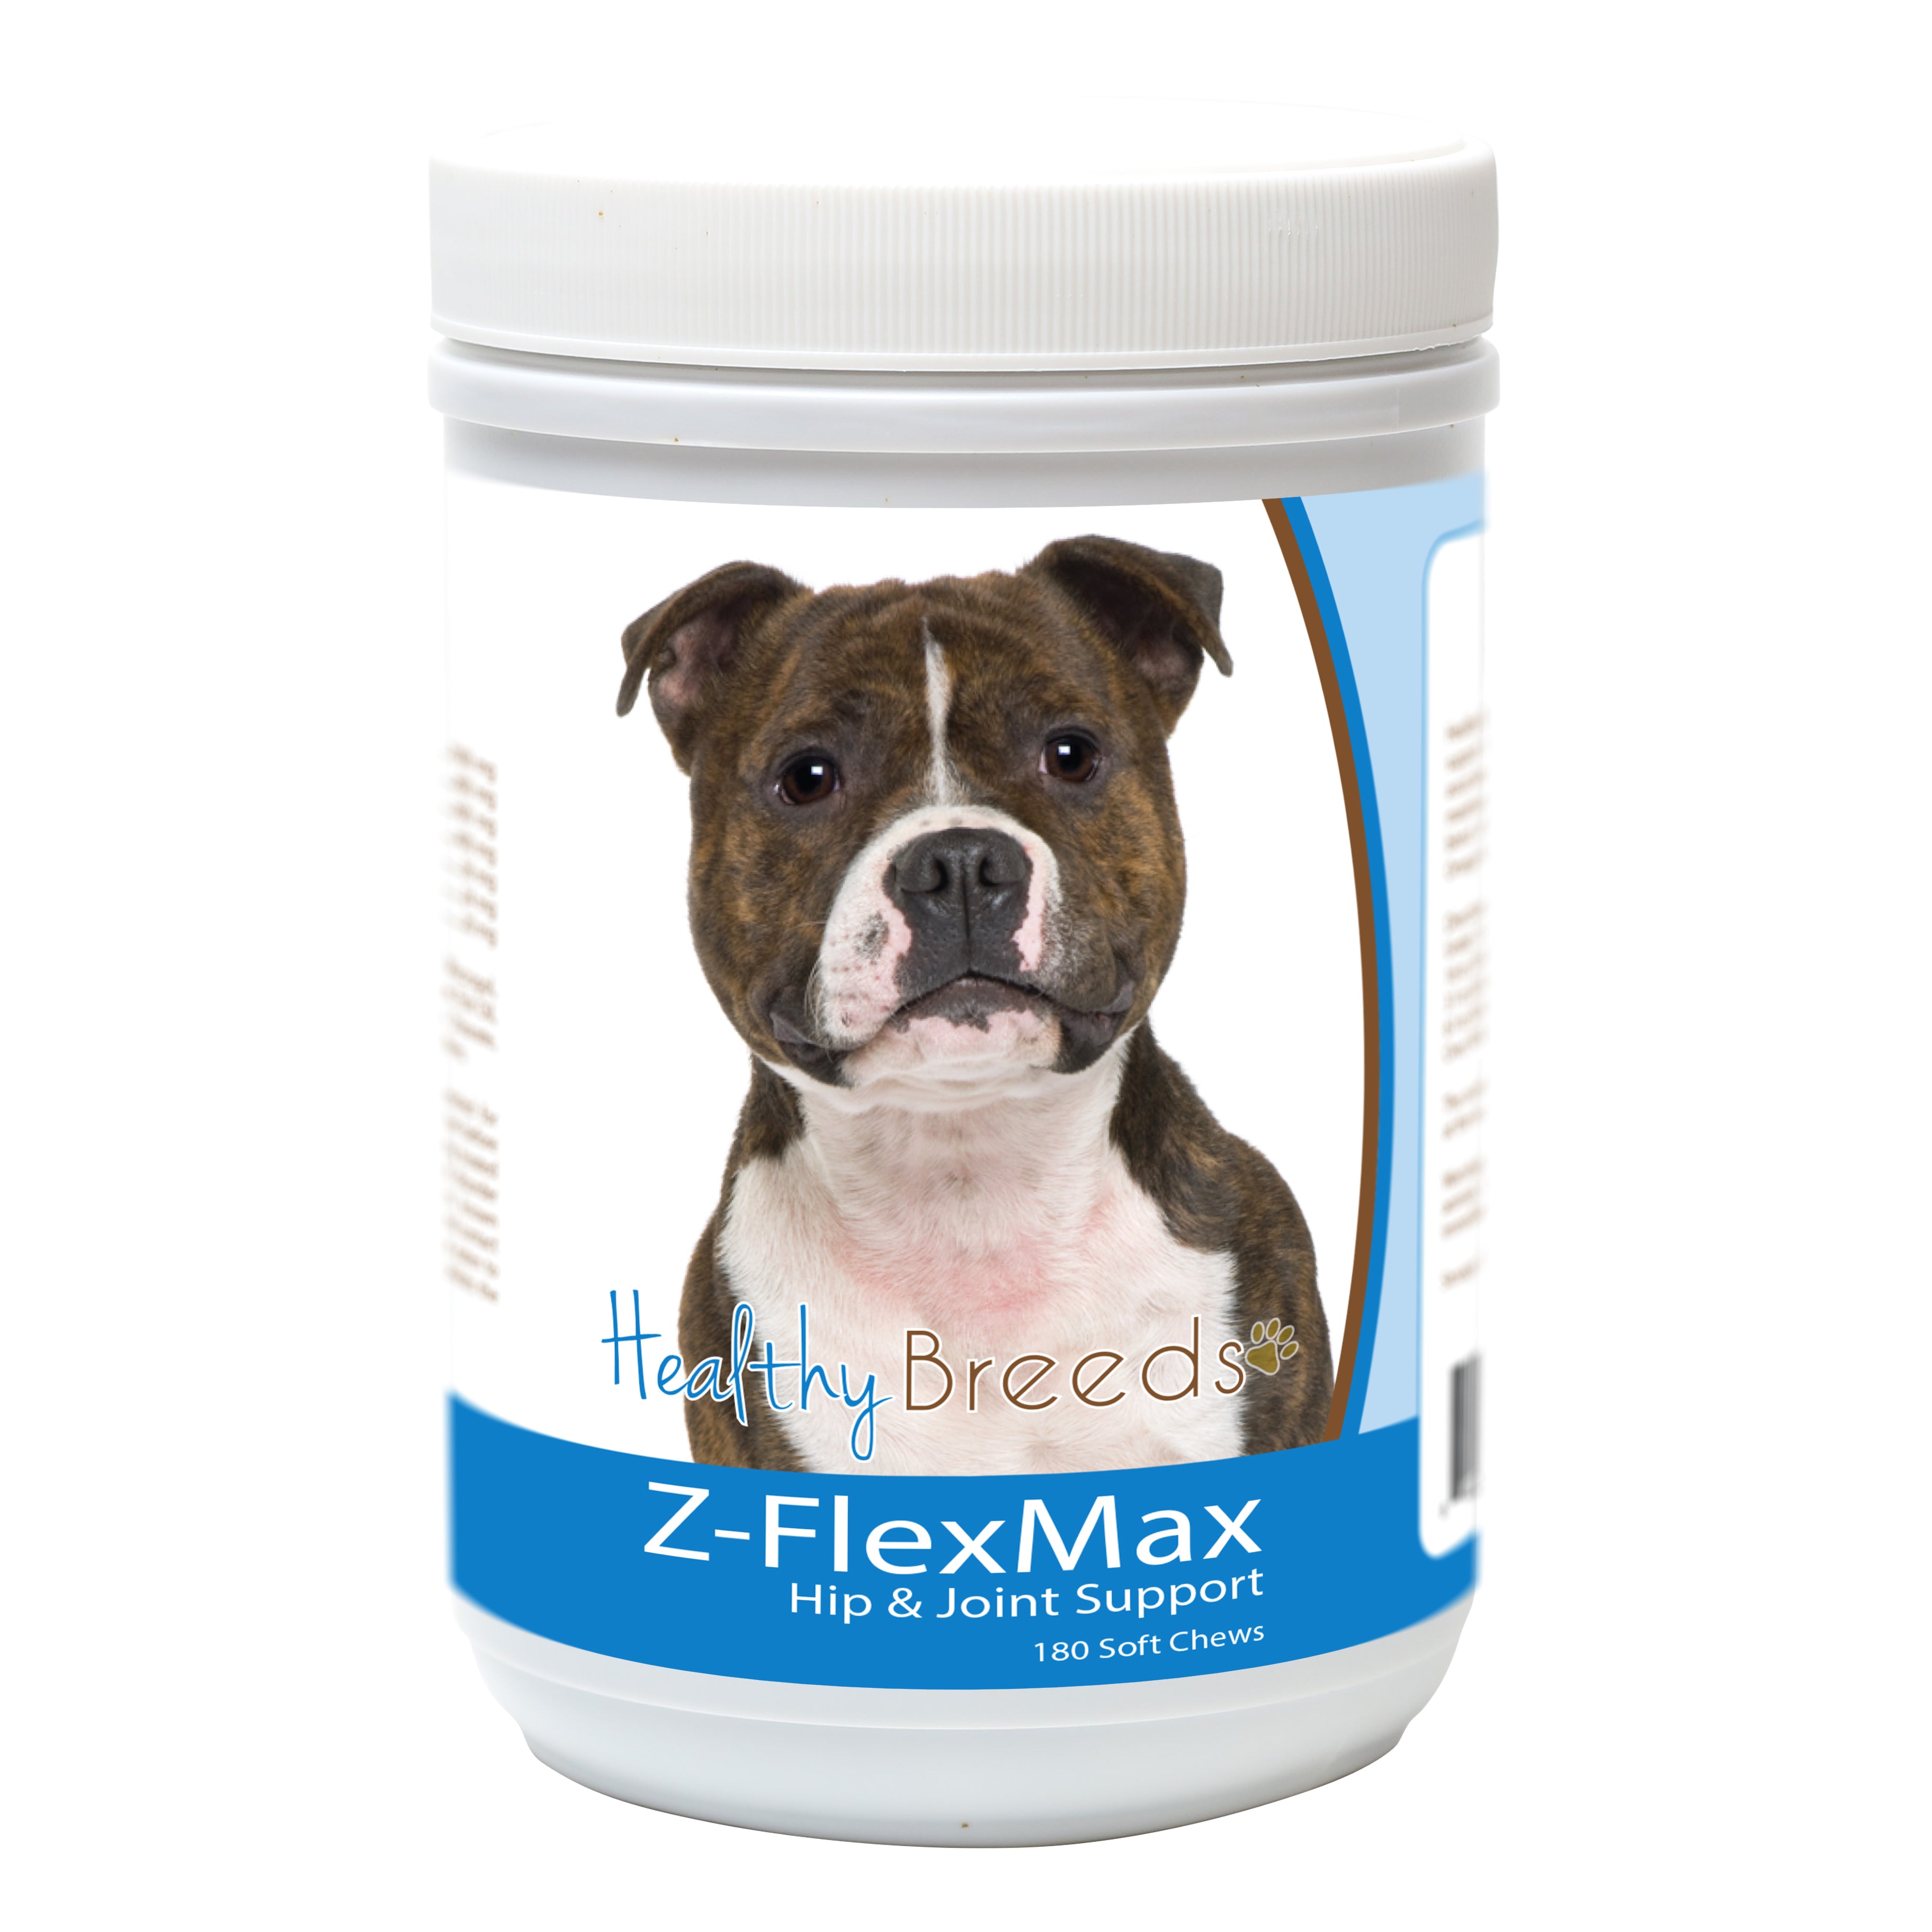 Staffordshire Bull Terrier Z-Flex Max Dog Hip and Joint Support 180 Count